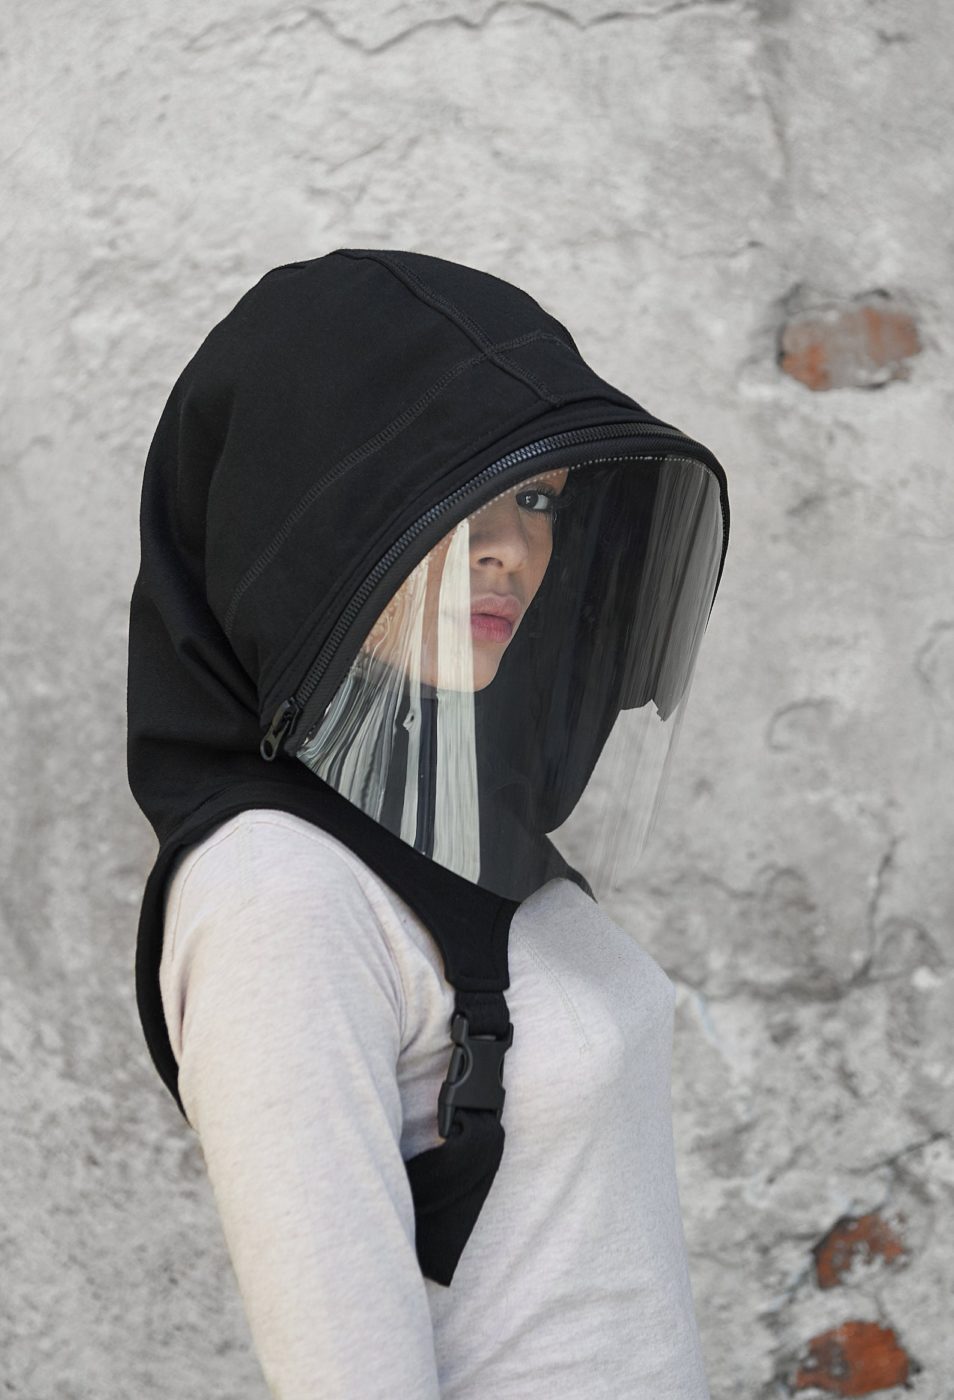 Woman wearing black hood that extends to her upper back and is secured under her arms with buckling straps. A zipper connects the front of the hood to a clear face shield.